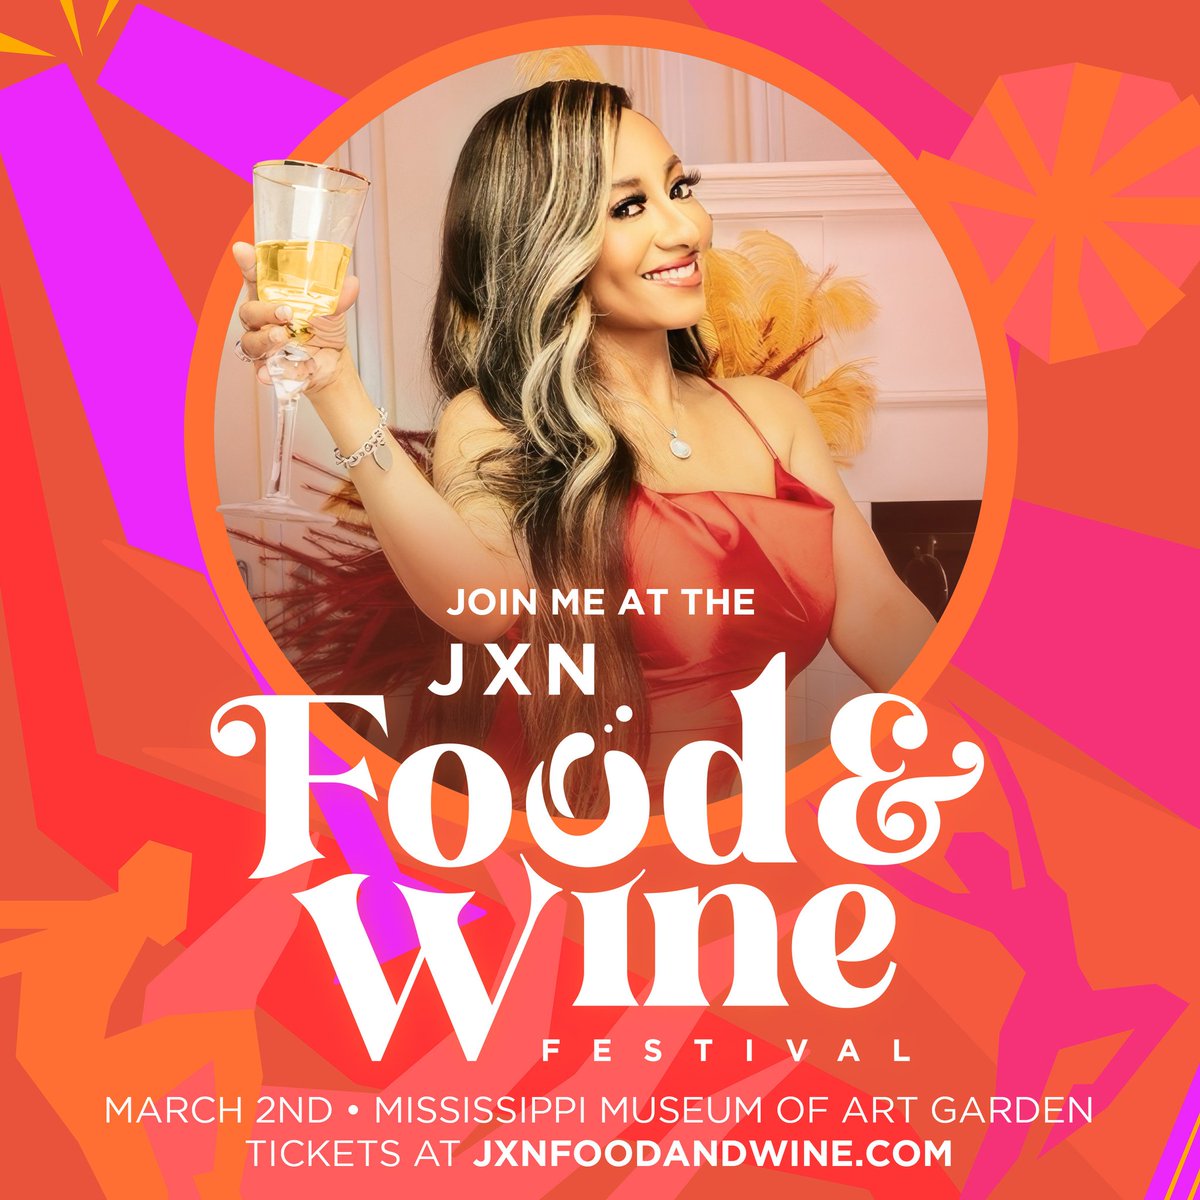 Jackson, MS! I hope you've secured your tickets for this sold out event! It's the JXN Food & Wine Festival tomorrow at the MS Museum of Art Garden! Amazing chefs, delicious food, & live music! Meet me there! #JXNFoodandWineFestival #VisitJackson #CitywithSoul #BelleCollective